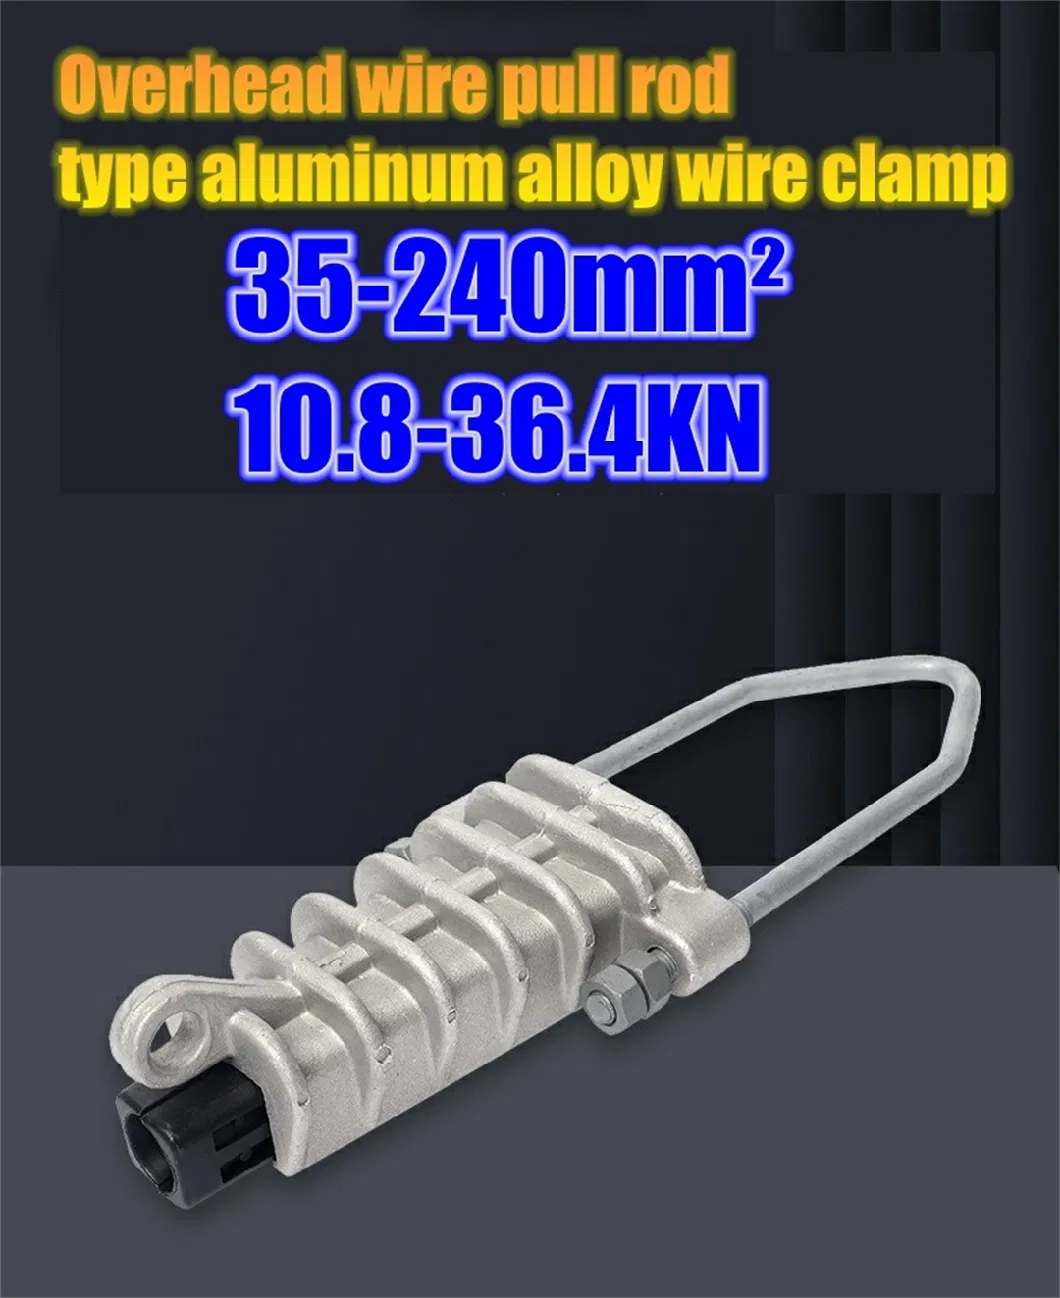 Nxjl 35-240mm 10.8-36.4kn Conductor Aluminum Alloy Tension Clamp of Wedge Insulation for Cable